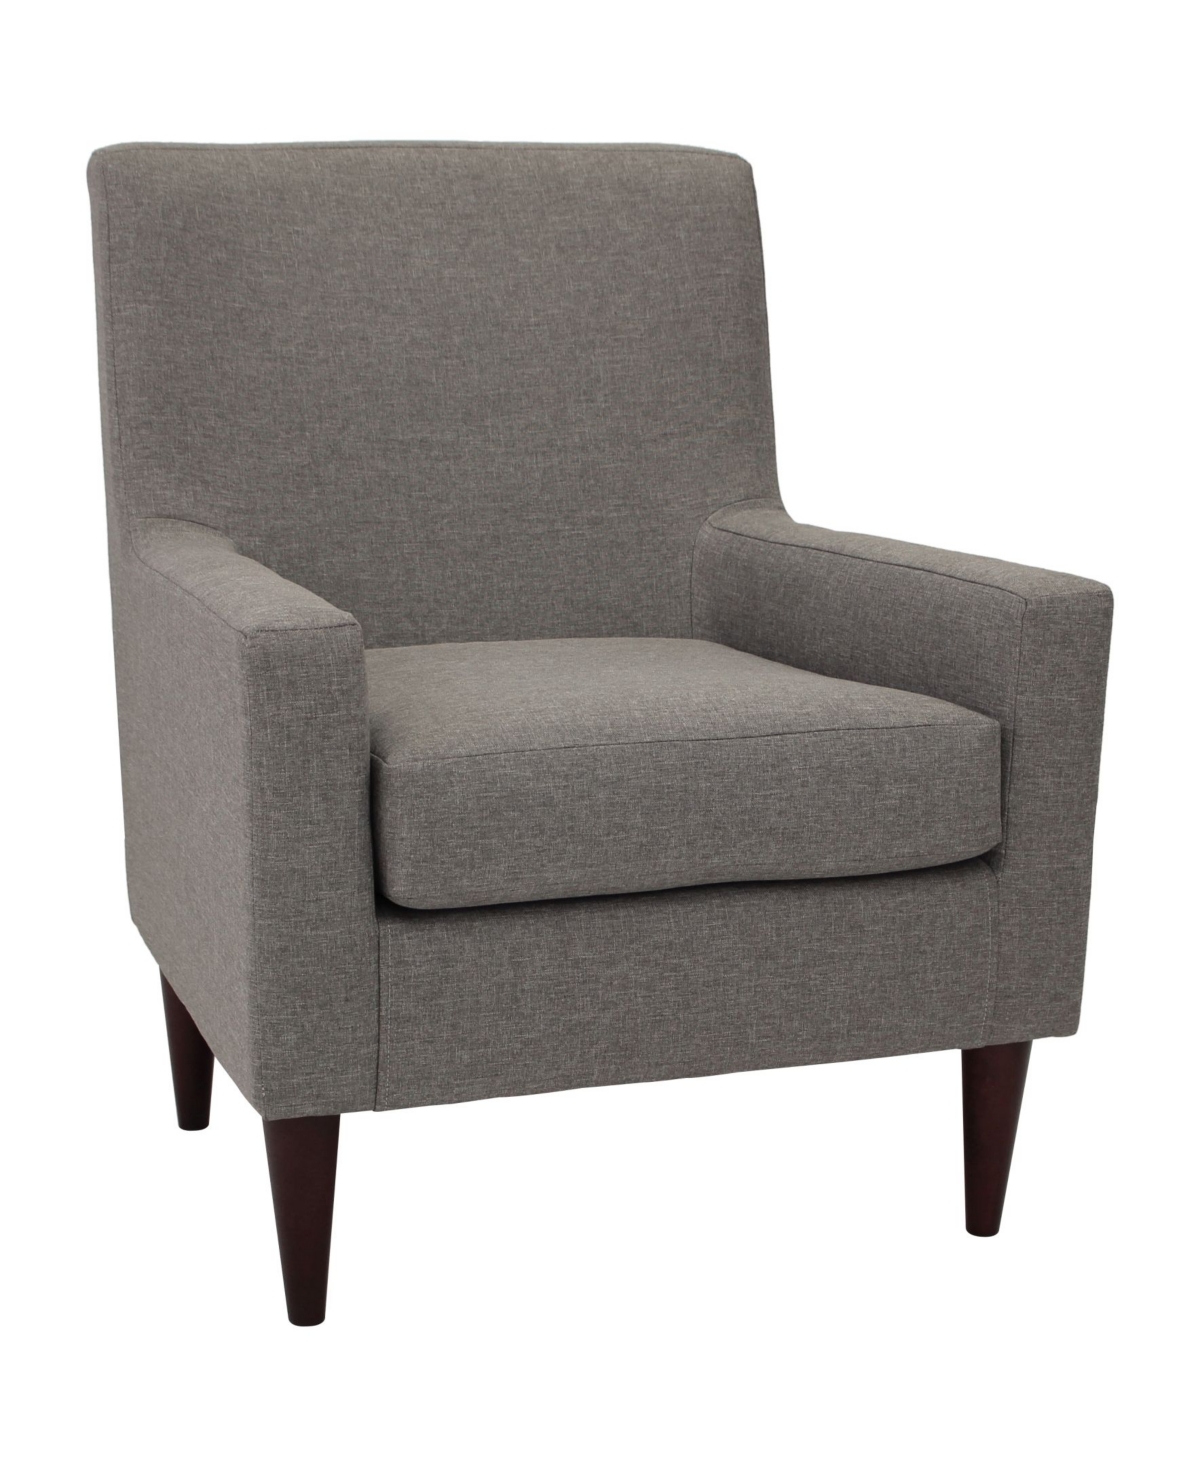 Foxhill Trading Emma Armed Chair In Gray